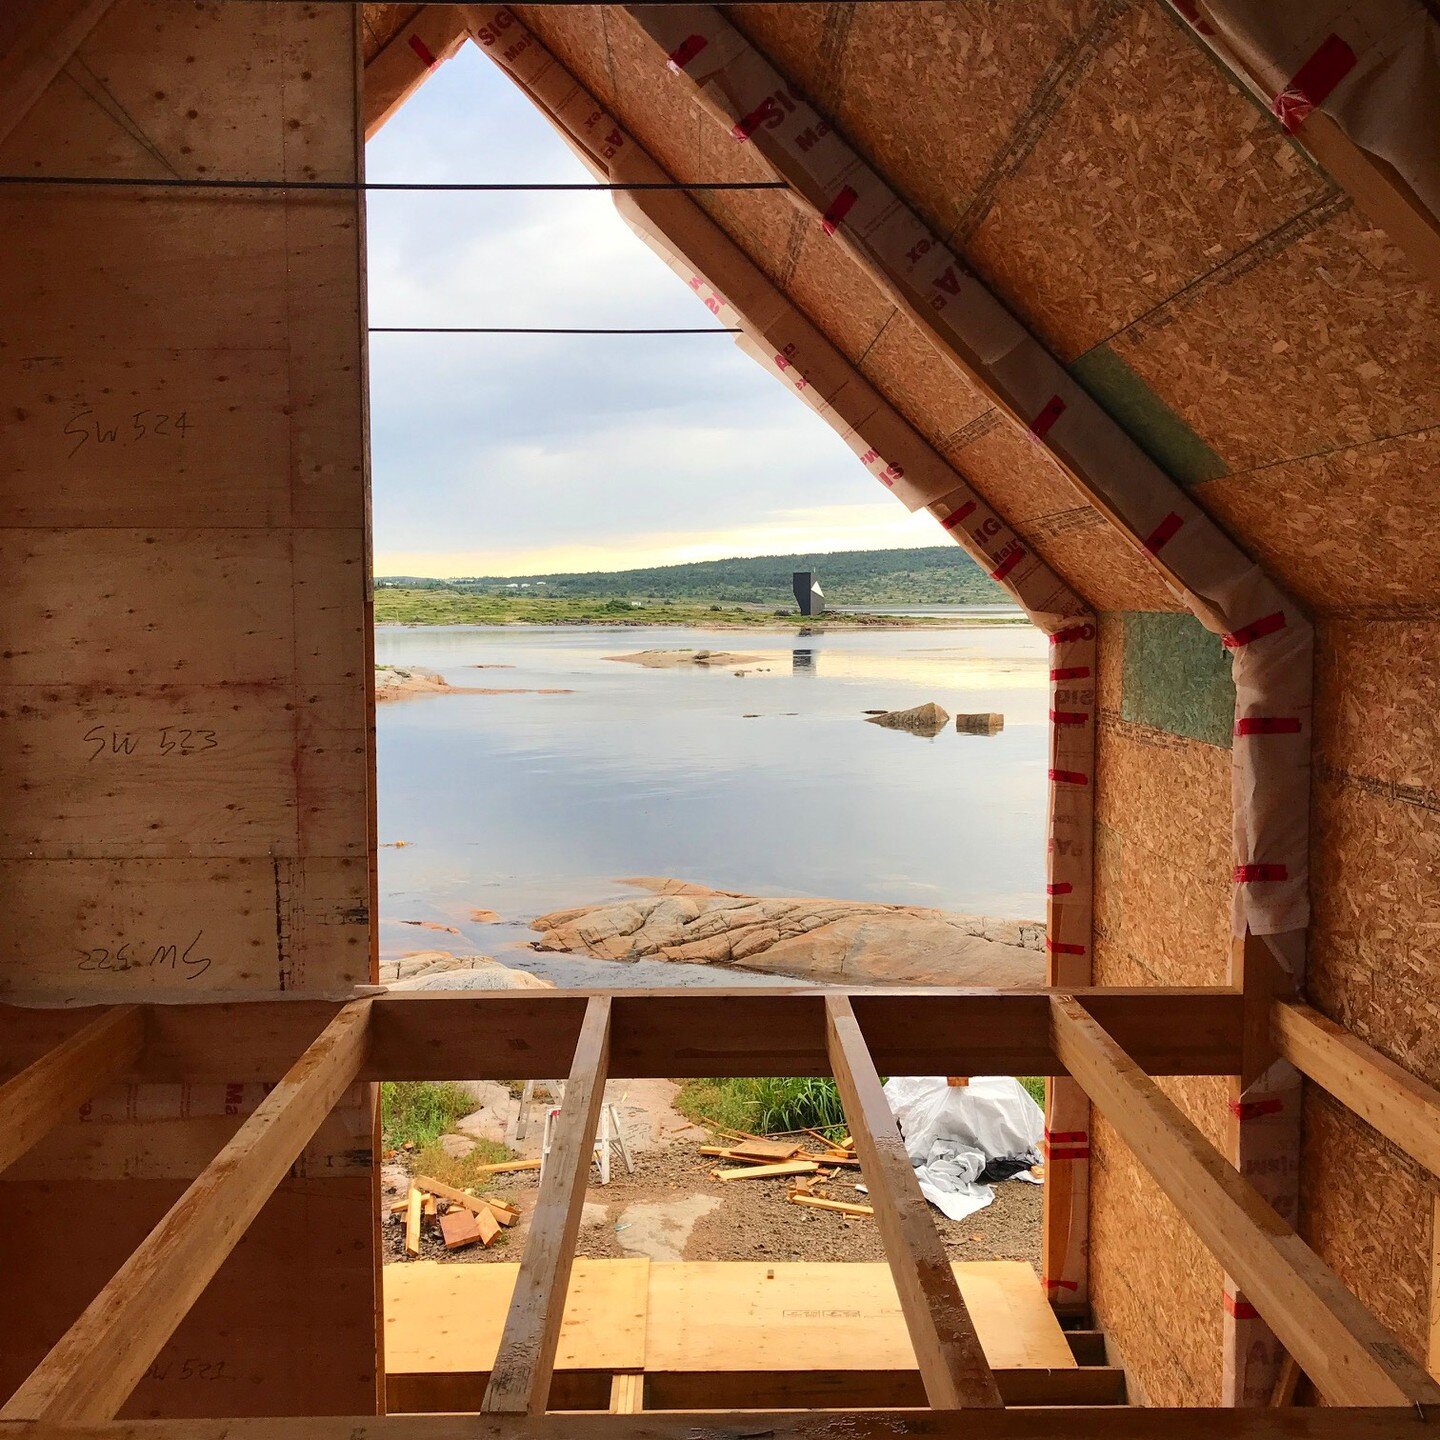 We've been away, working on a special project with @thebackcountryhutcompany in Fogo Island, Newfoundland...

We cannot wait to show you...

#fogo #fogoisland #newfoundland #newfoundlandandlabrador #design #cabin #scandinaviandesign #interiordesign #